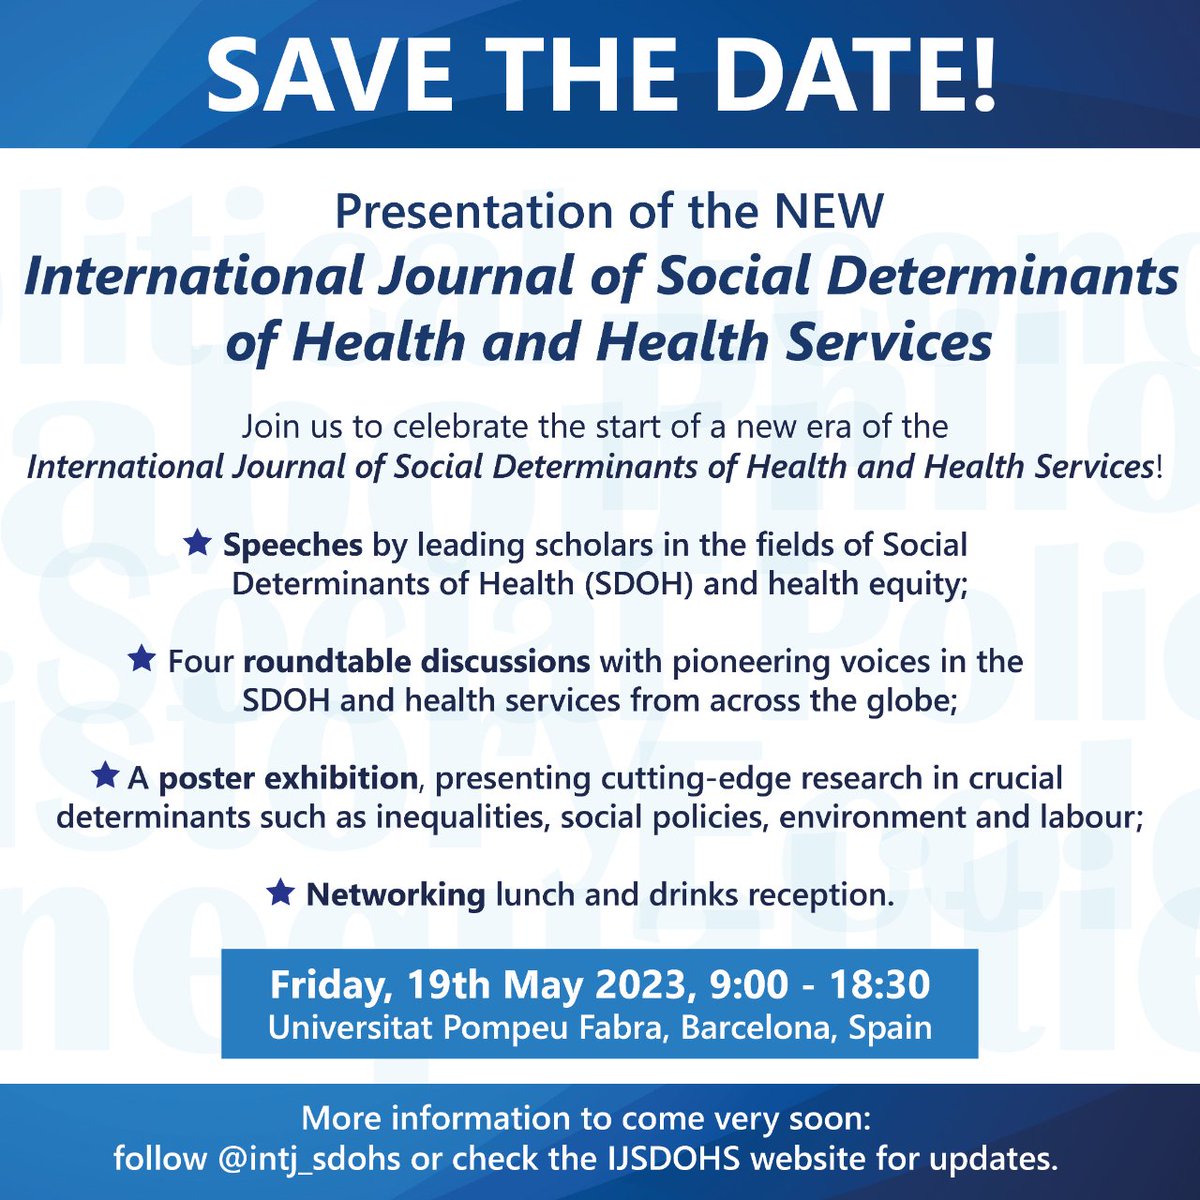 📣 SAVE THE DATE! 

We are hosting a one-day presentation of the IJSDOHS this Spring. Join international experts in #SDOH, #healthequity and #healthservices to celebrate this new era of the journal!

🗓️ May 19th 2023
📍 Barcelona, Spain

More info coming soon...